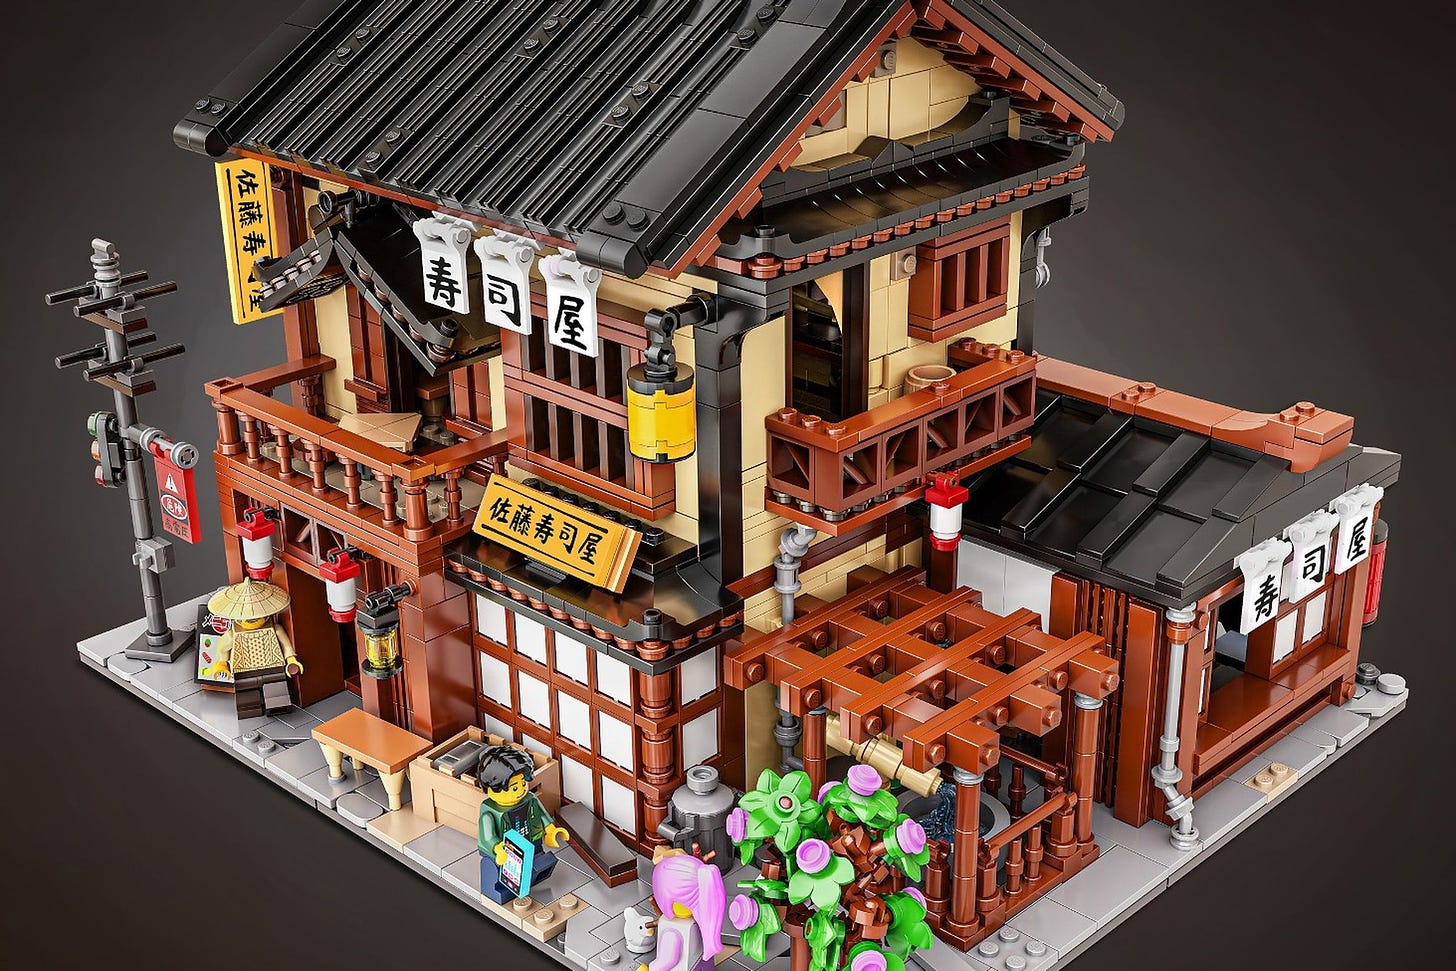 A traditional looking Japanese building made entirely out of Lego, with a fountain, flowers, two stories, entranceways and signs to the Sushi restaurant.